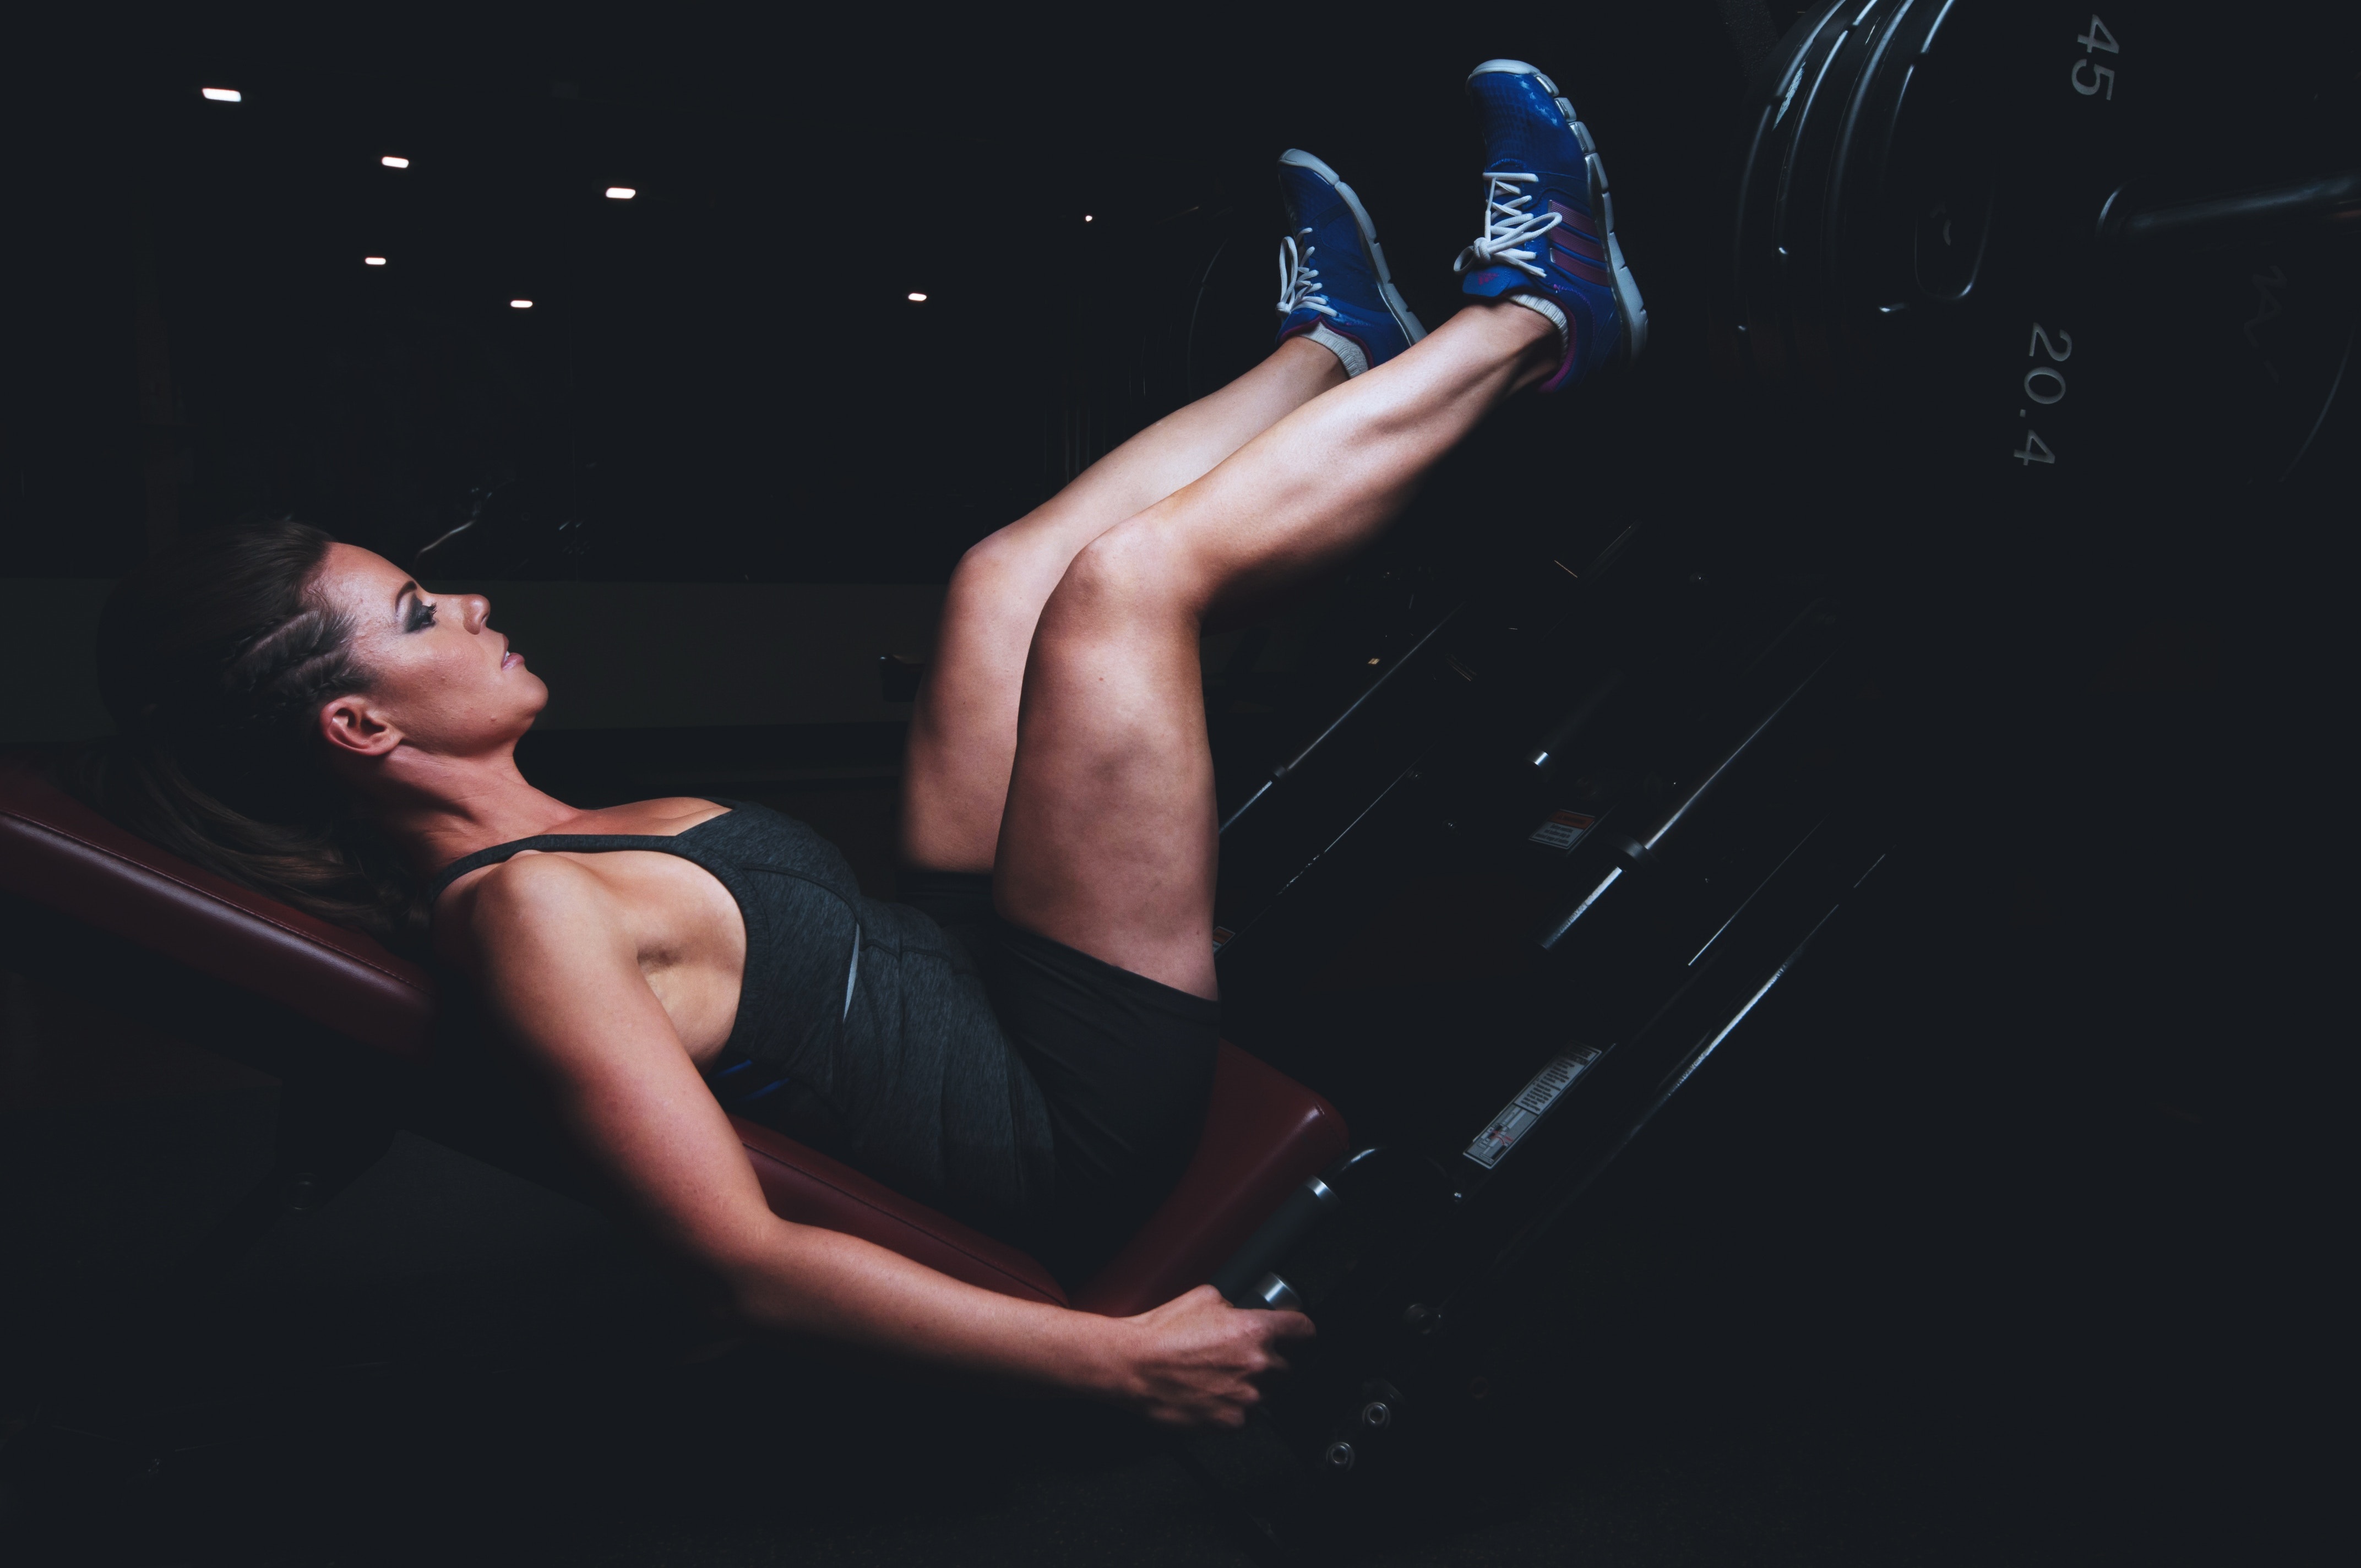 Working out at the gym should make you feel stronger and better, not weaker and broken down. Here are some tips for staying injury-free at the gym.